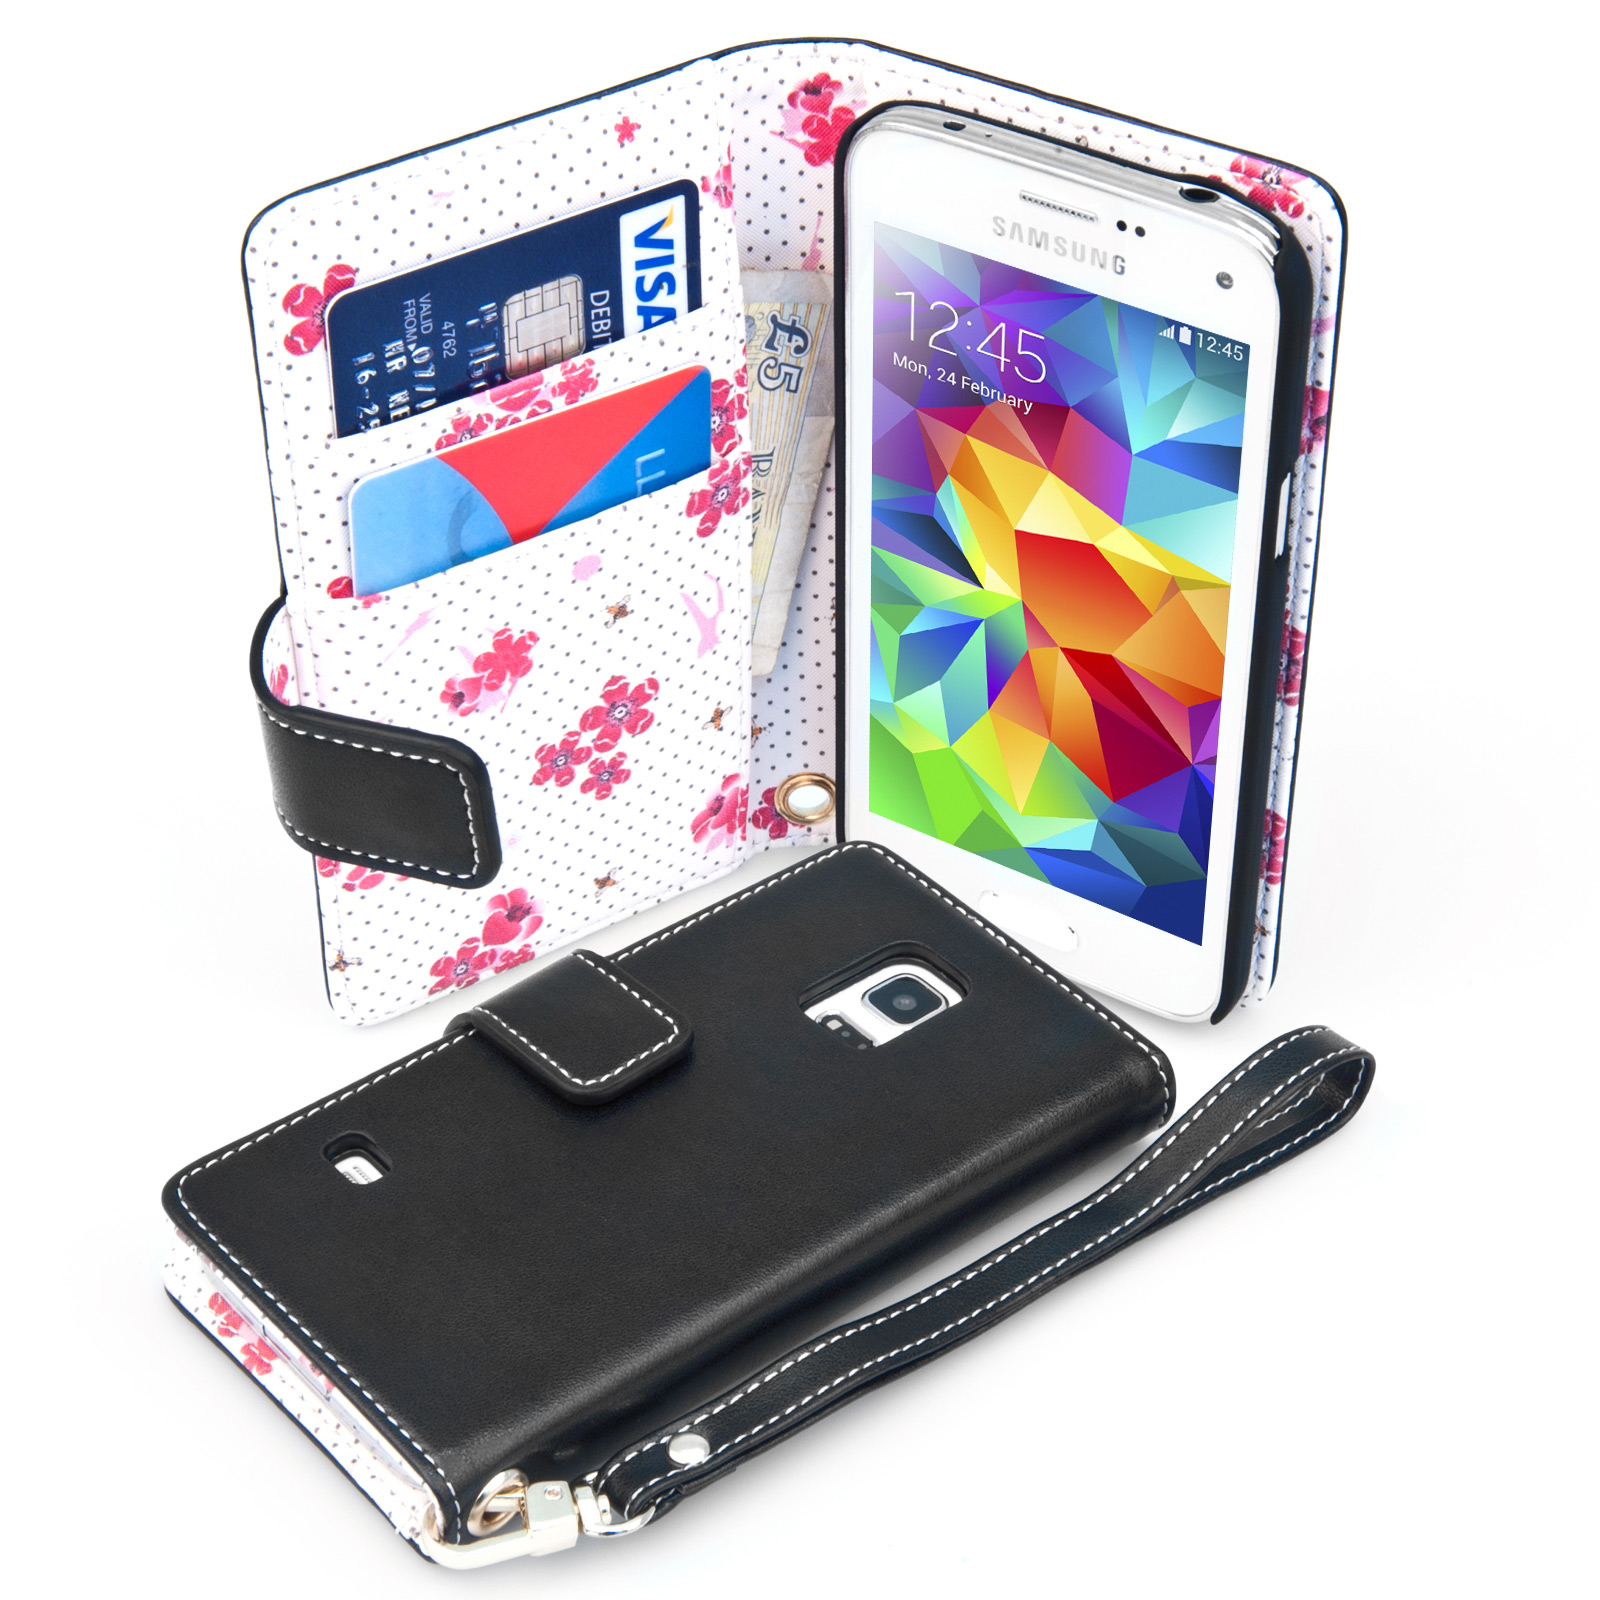 Caseflex  Samsung Galaxy S5 Mini Leather-Effect Wallet Case – Black with Floral Lining